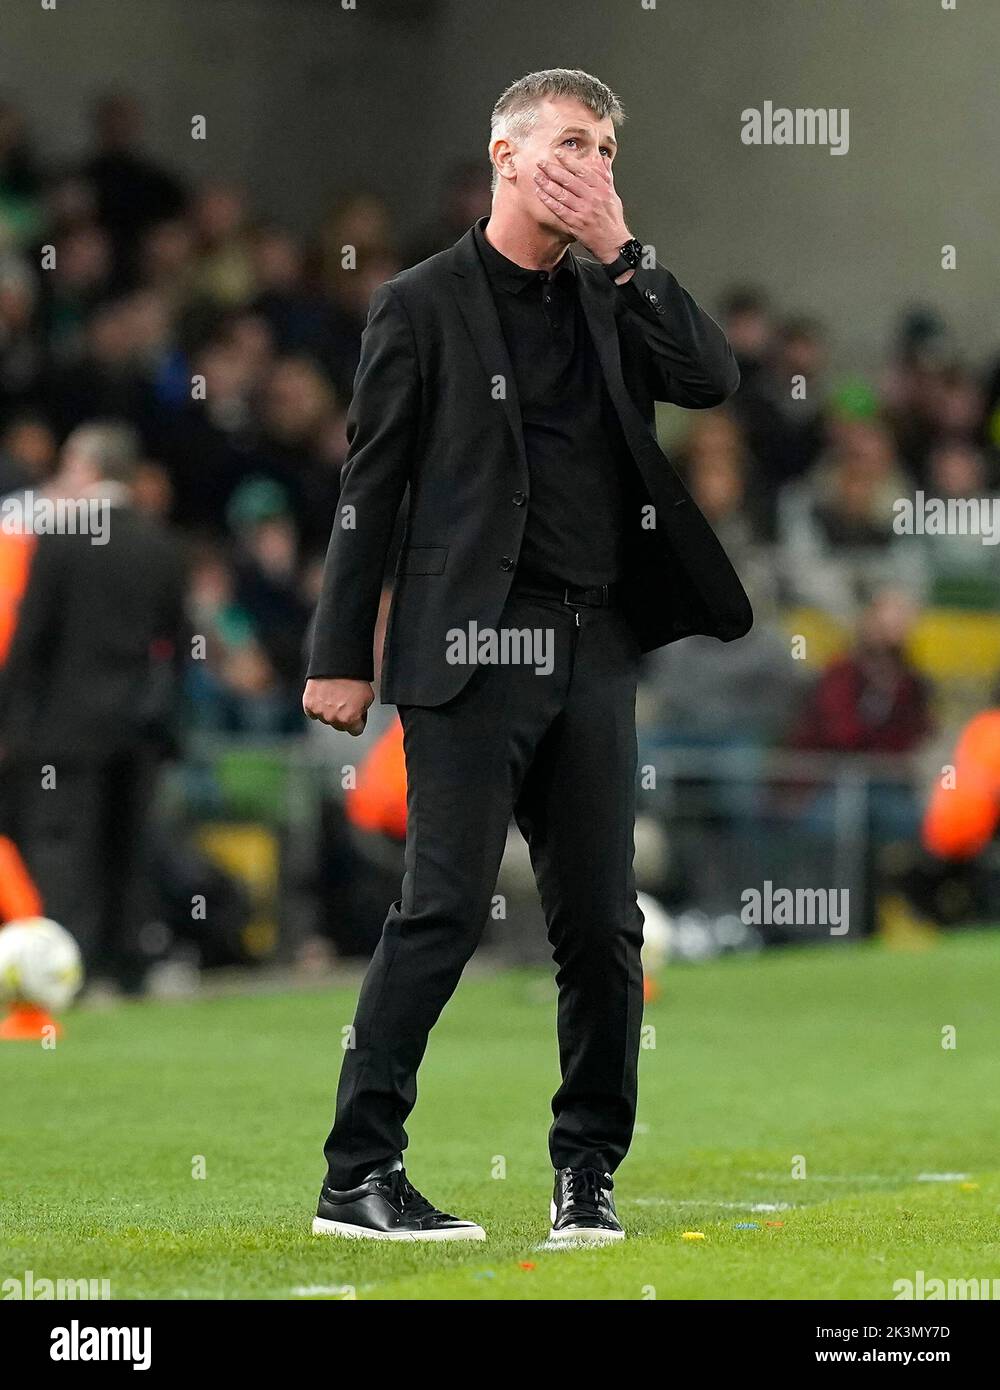 Republic of Ireland head coach Stephen Kenny during the UEFA Nations League match at the Aviva Stadium in Dublin, Ireland. Picture date: Tuesday September 27, 2022. Stock Photo